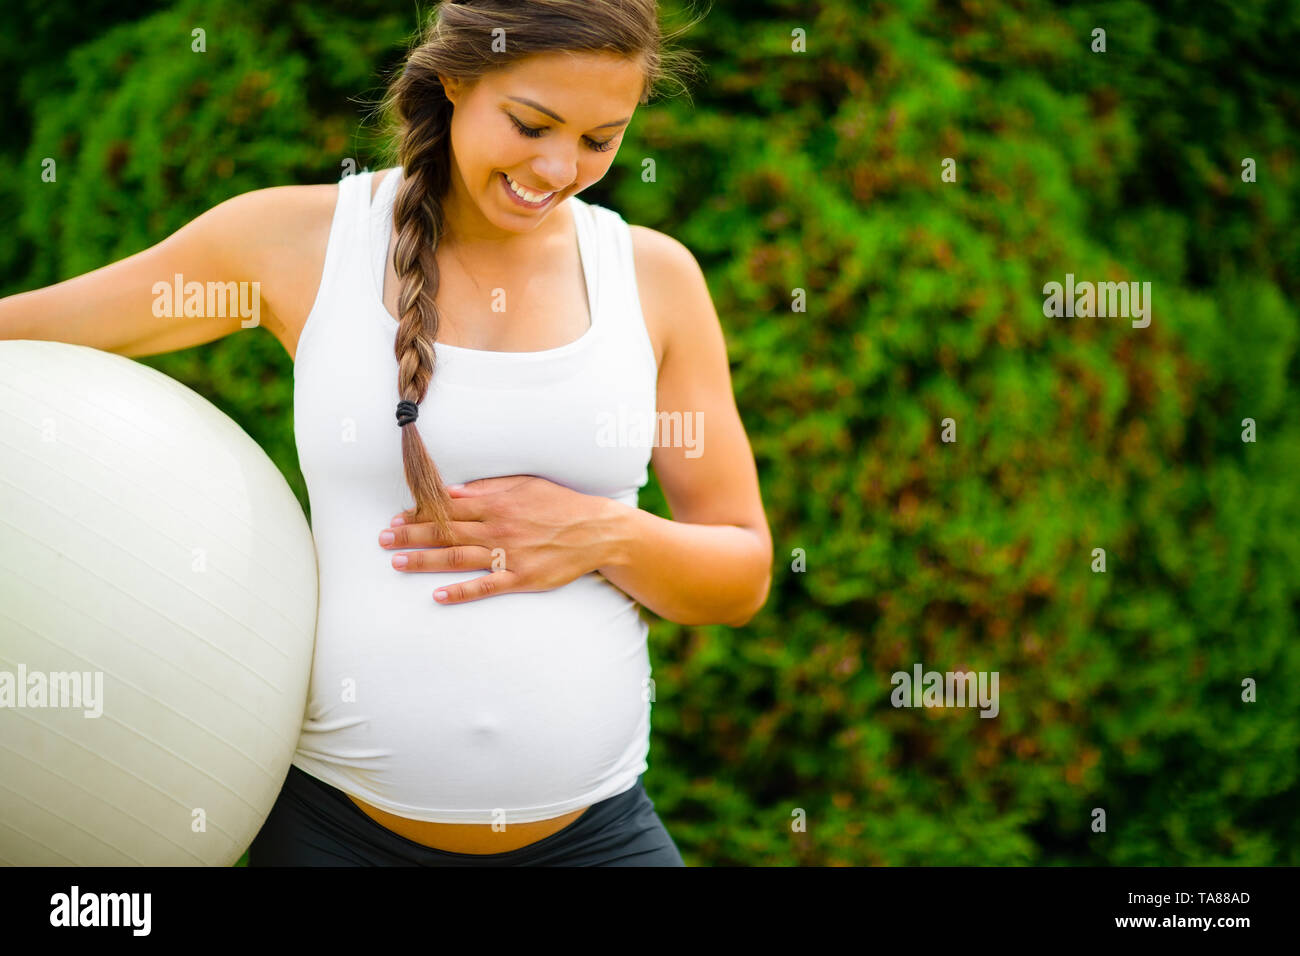 Pregnant Woman Touching Abdomen While Holding Fitness Ball In Park Stock Photo